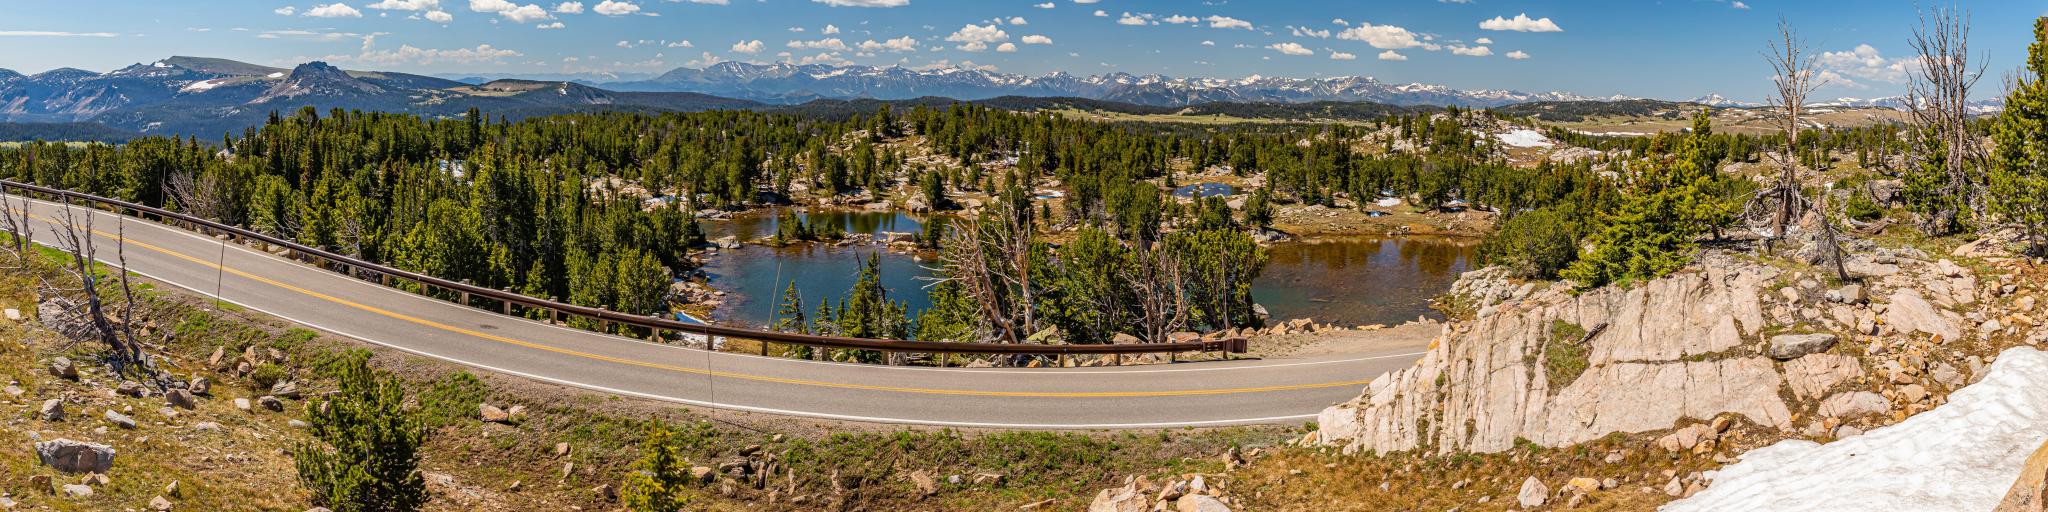 Stunning views over Beartooth Highway, with panoramic views of winding road in forefront and lush landscape and hills behind 